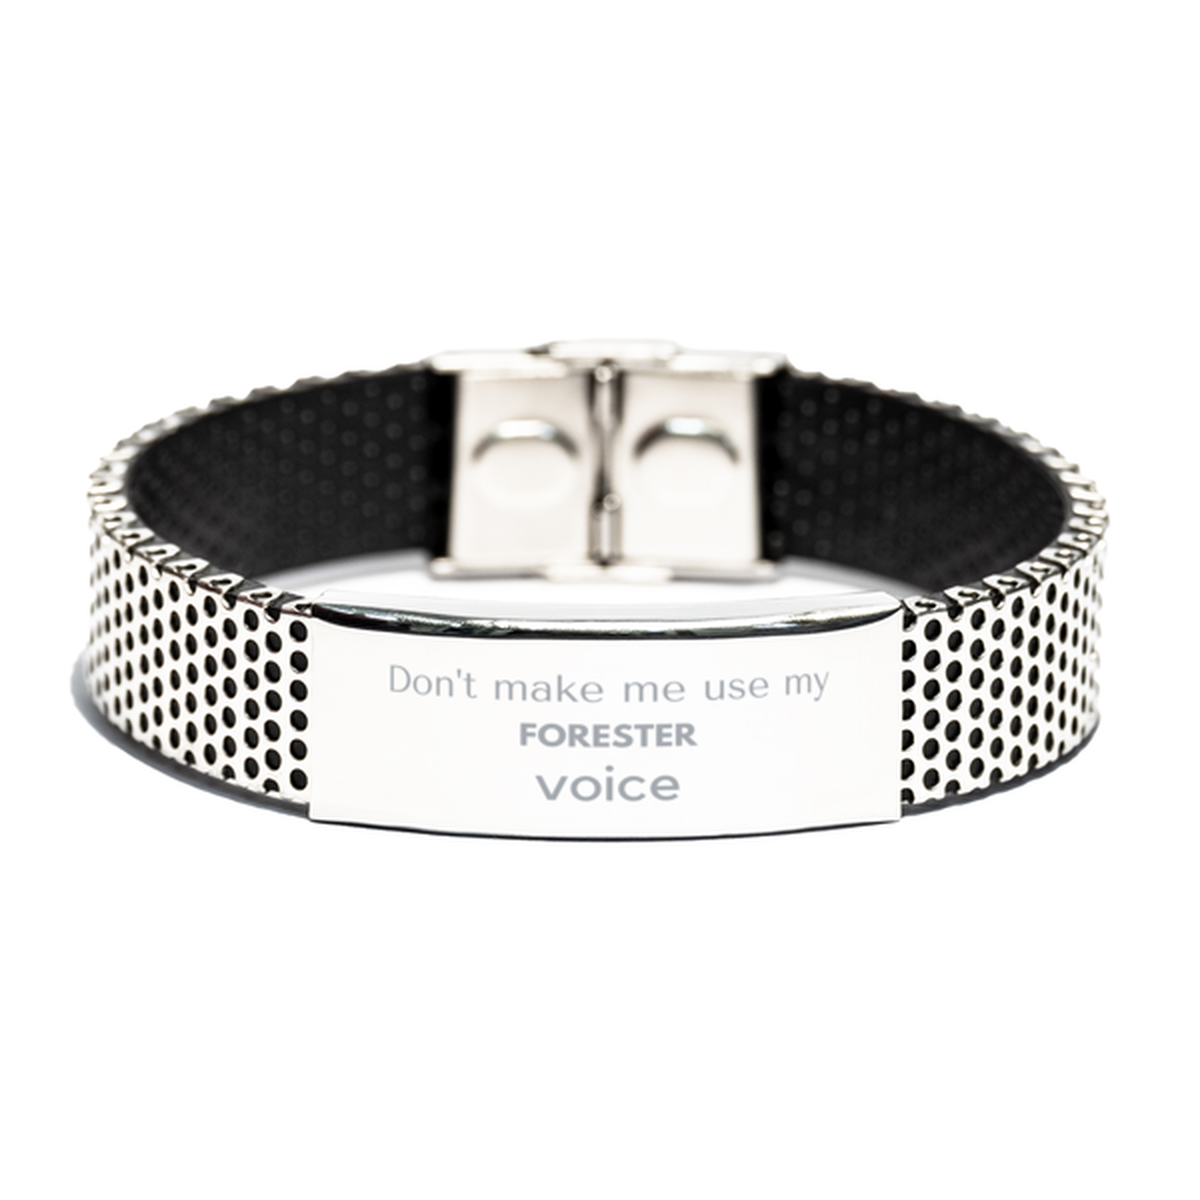 Don't make me use my Forester voice, Sarcasm Forester Gifts, Christmas Forester Stainless Steel Bracelet Birthday Unique Gifts For Forester Coworkers, Men, Women, Colleague, Friends